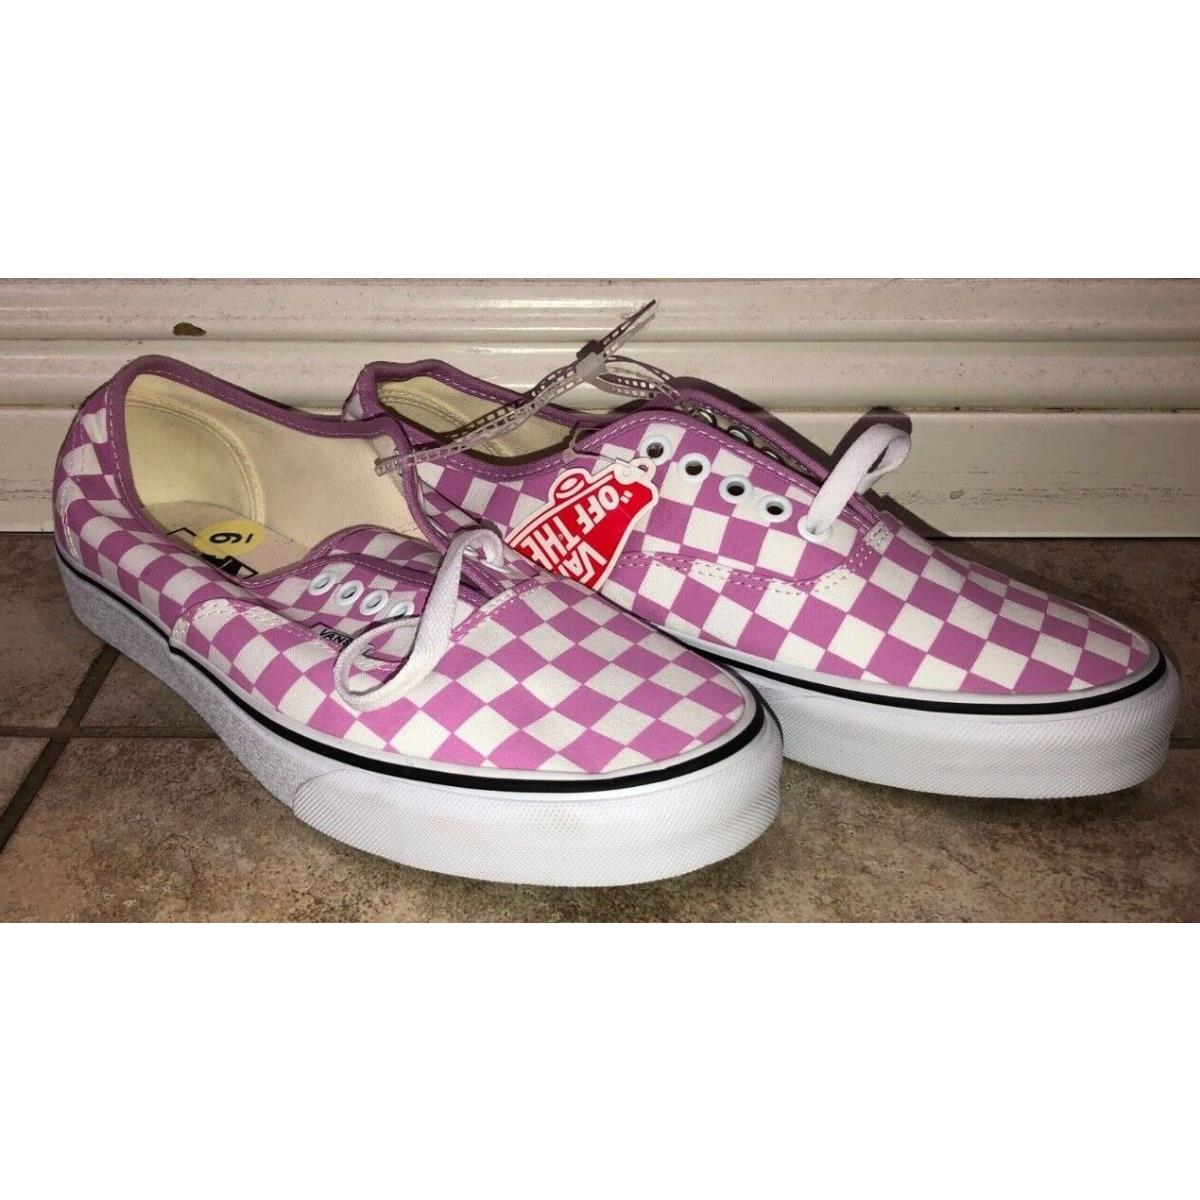 Vans Checkered Lace Up Skate Shoes Pink White Womens Sz 10.5